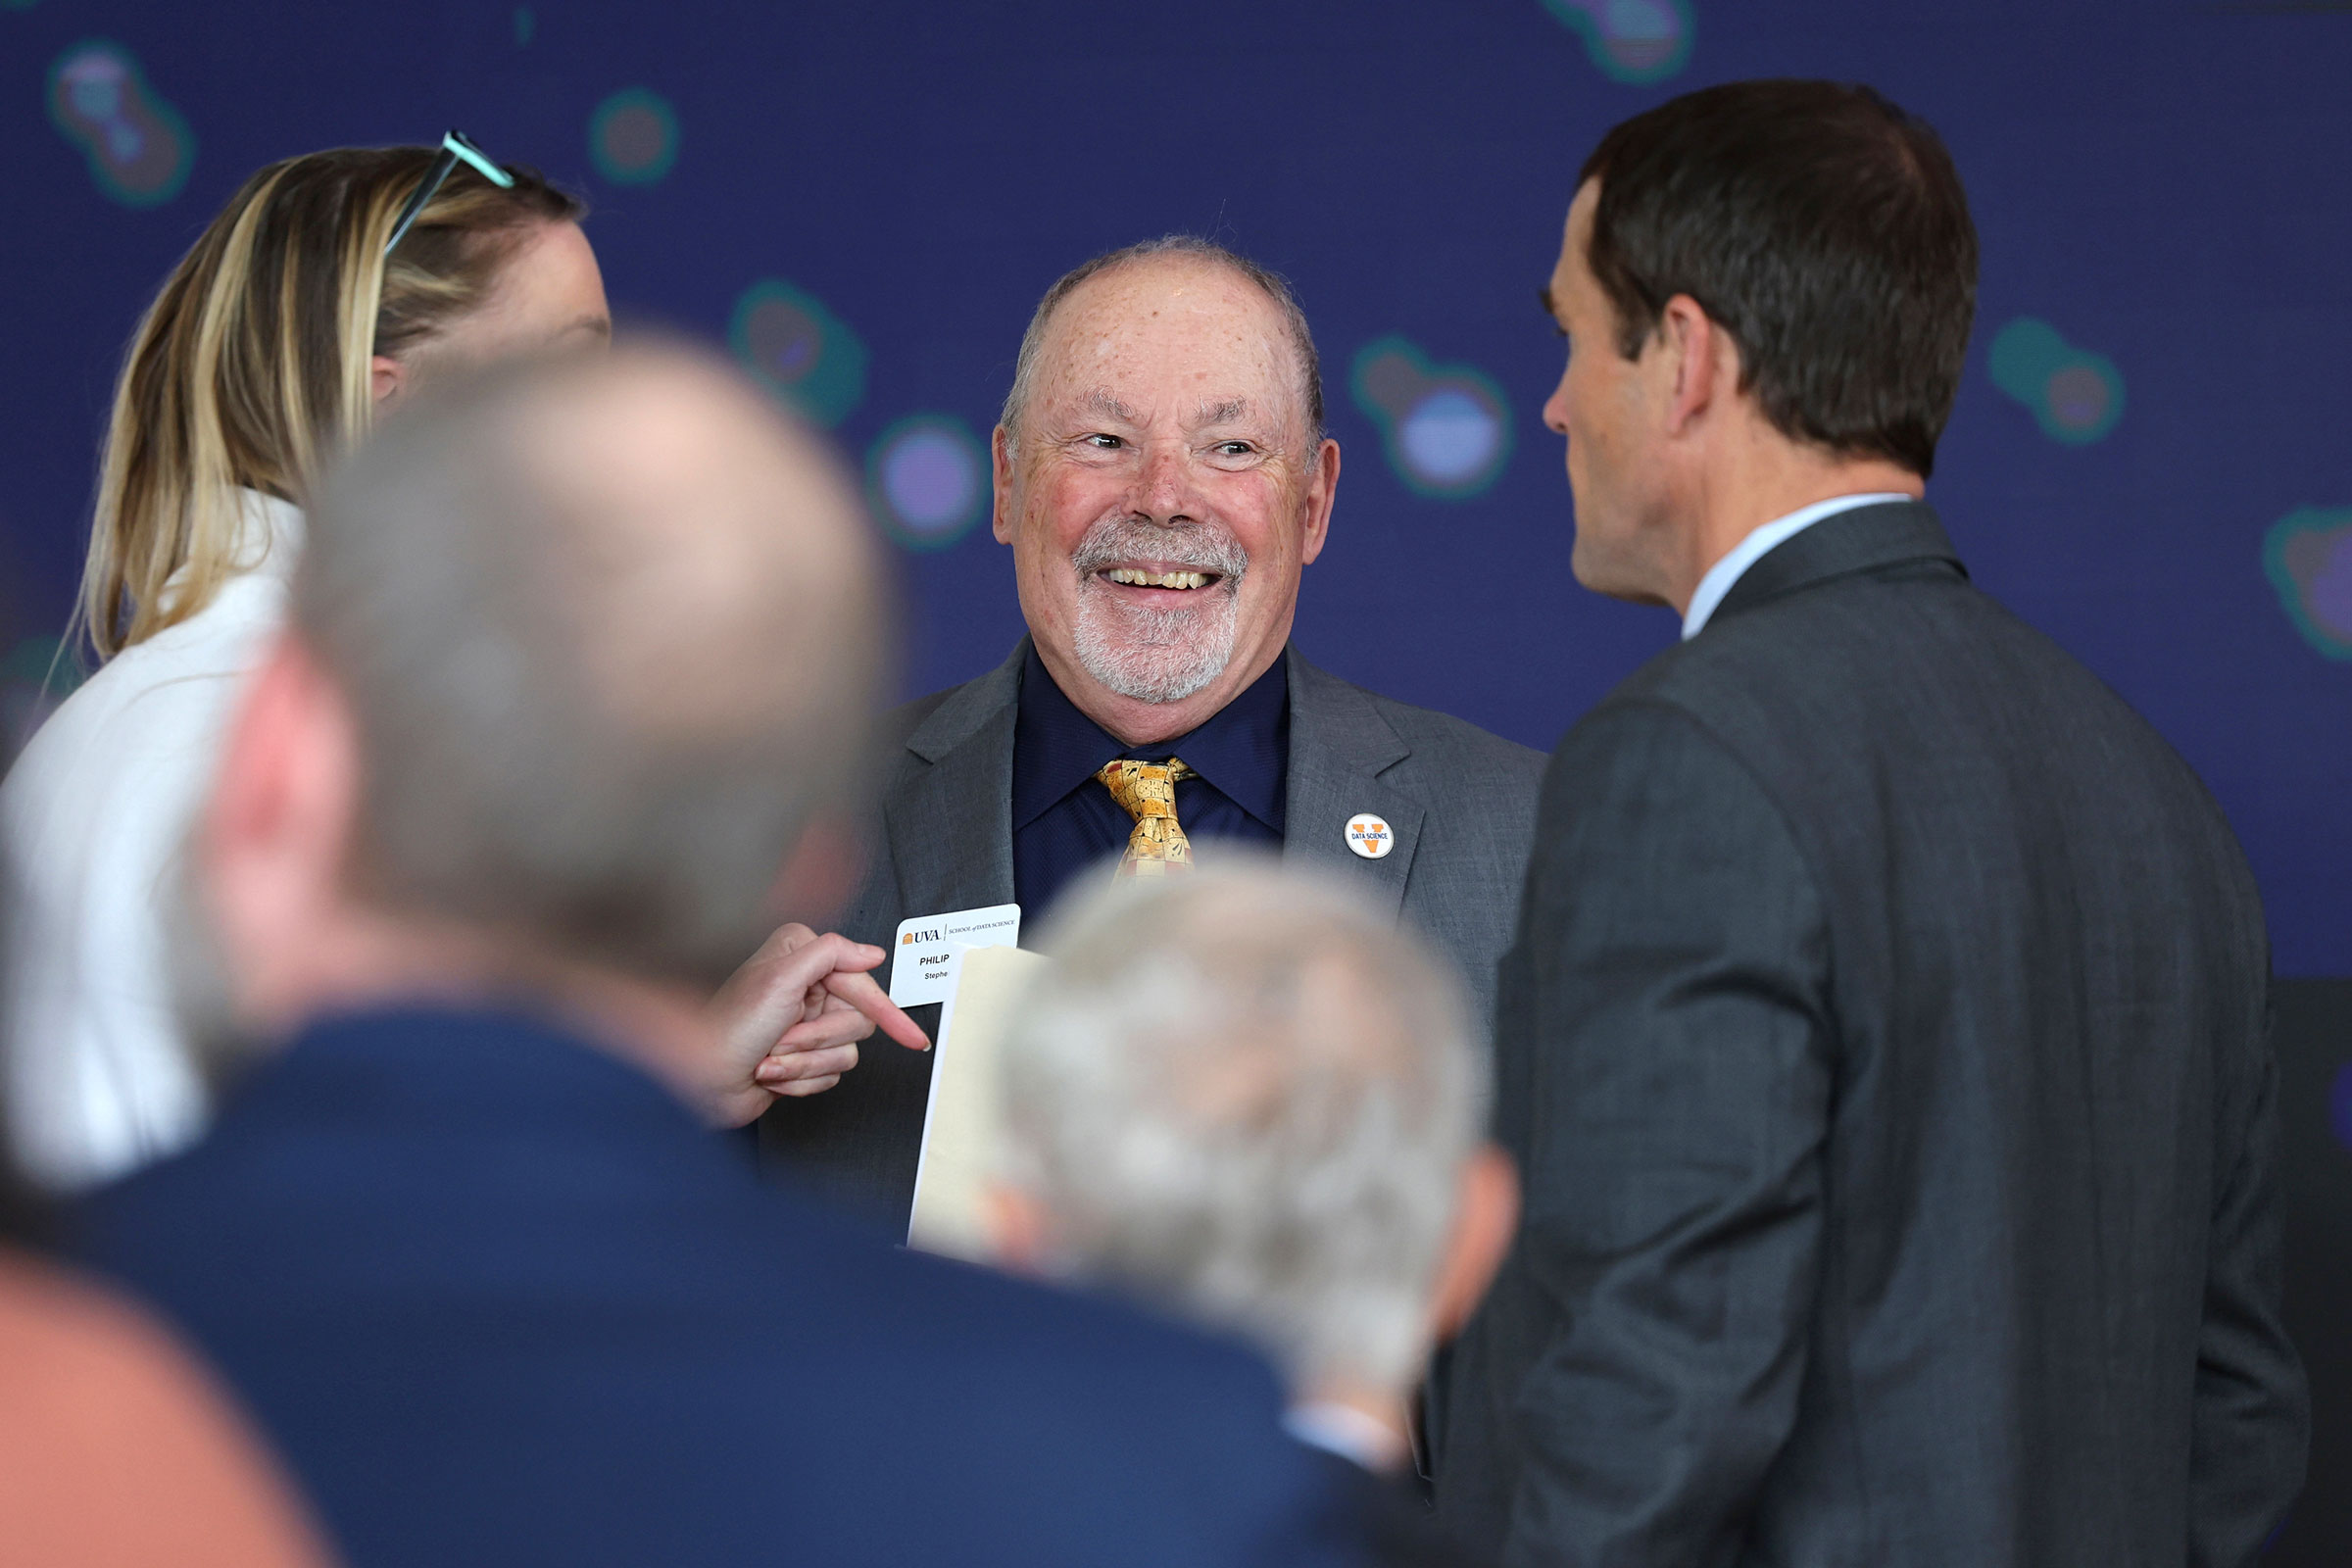 Bourne, center, chats with UVA President Jim Ryan, right, during the grand opening celebration.